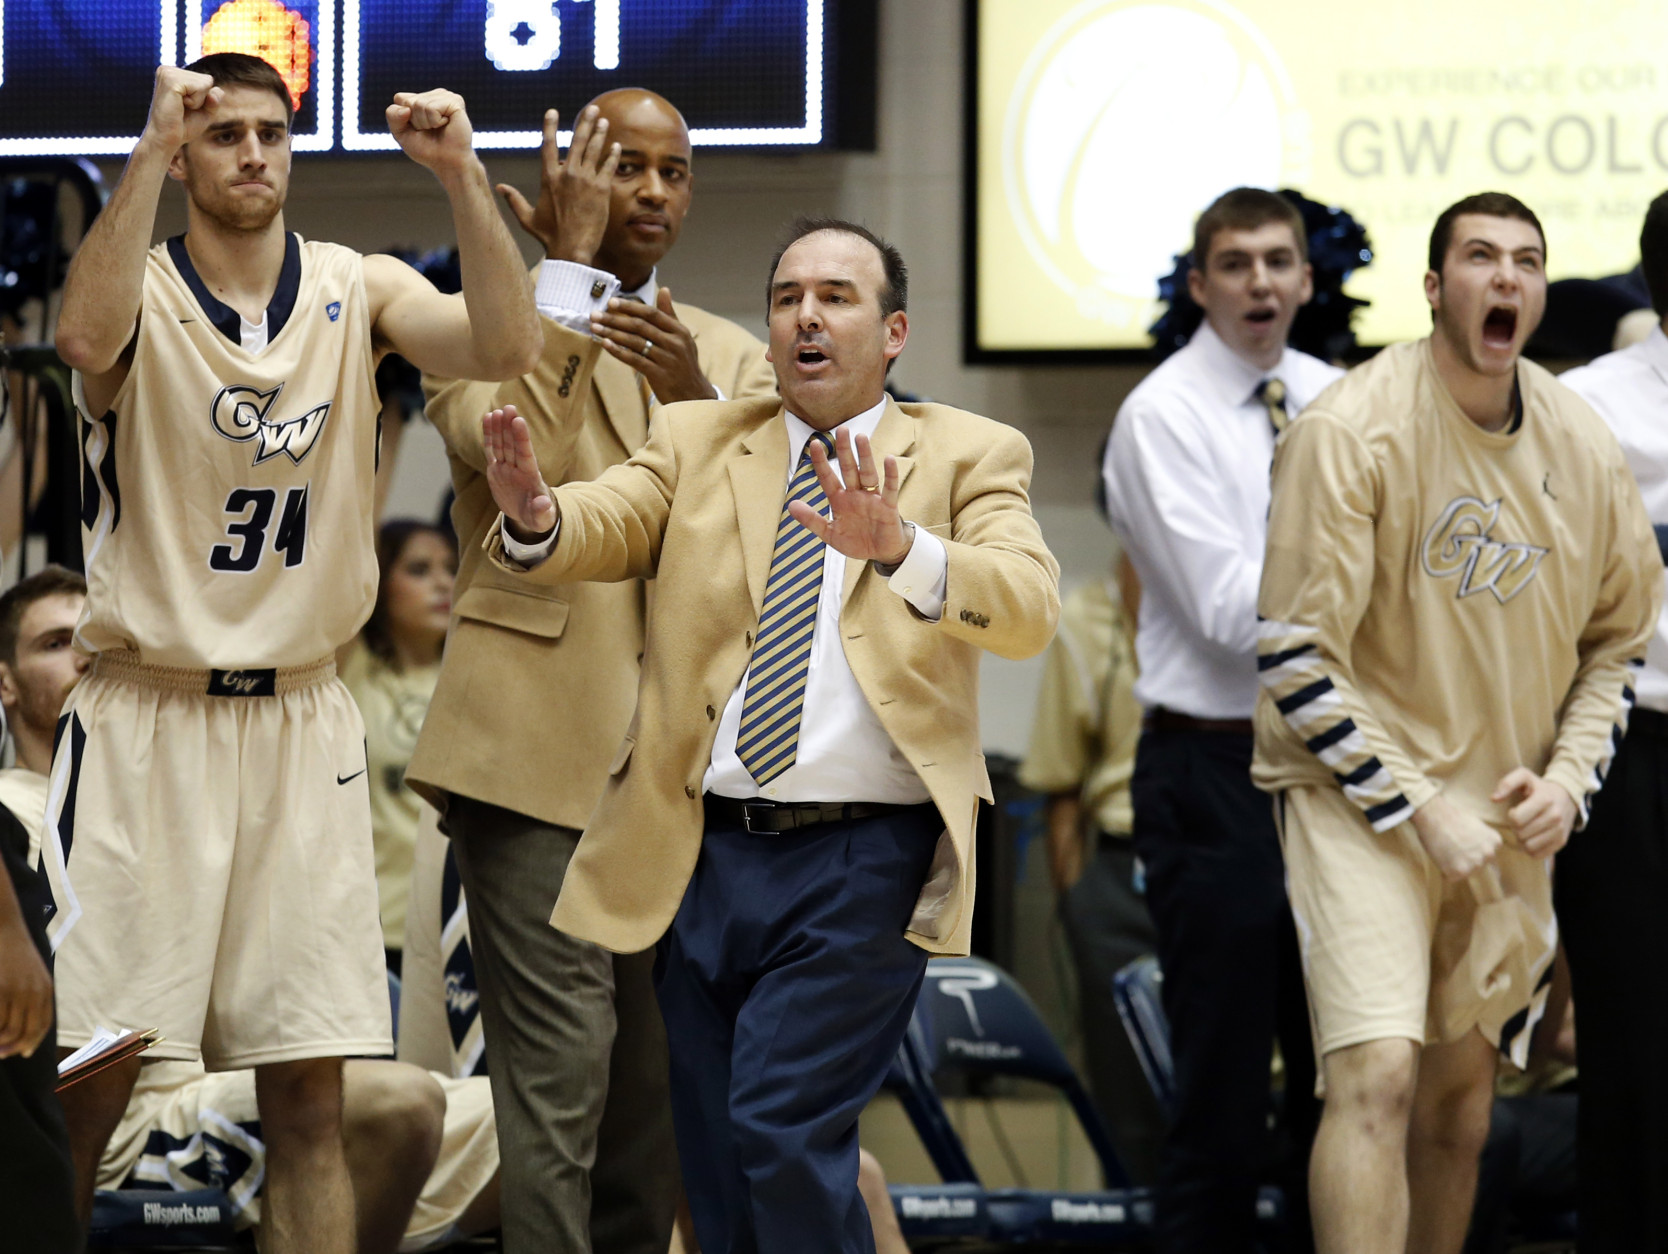 George Washington head coach Mike Lonergan, center, reacts with his team during the second half of an NCAA college basketball game against Rutgers, Wednesday, Dec. 4, 2013, in Washington. George Washington won 93-87. (AP Photo/Alex Brandon)